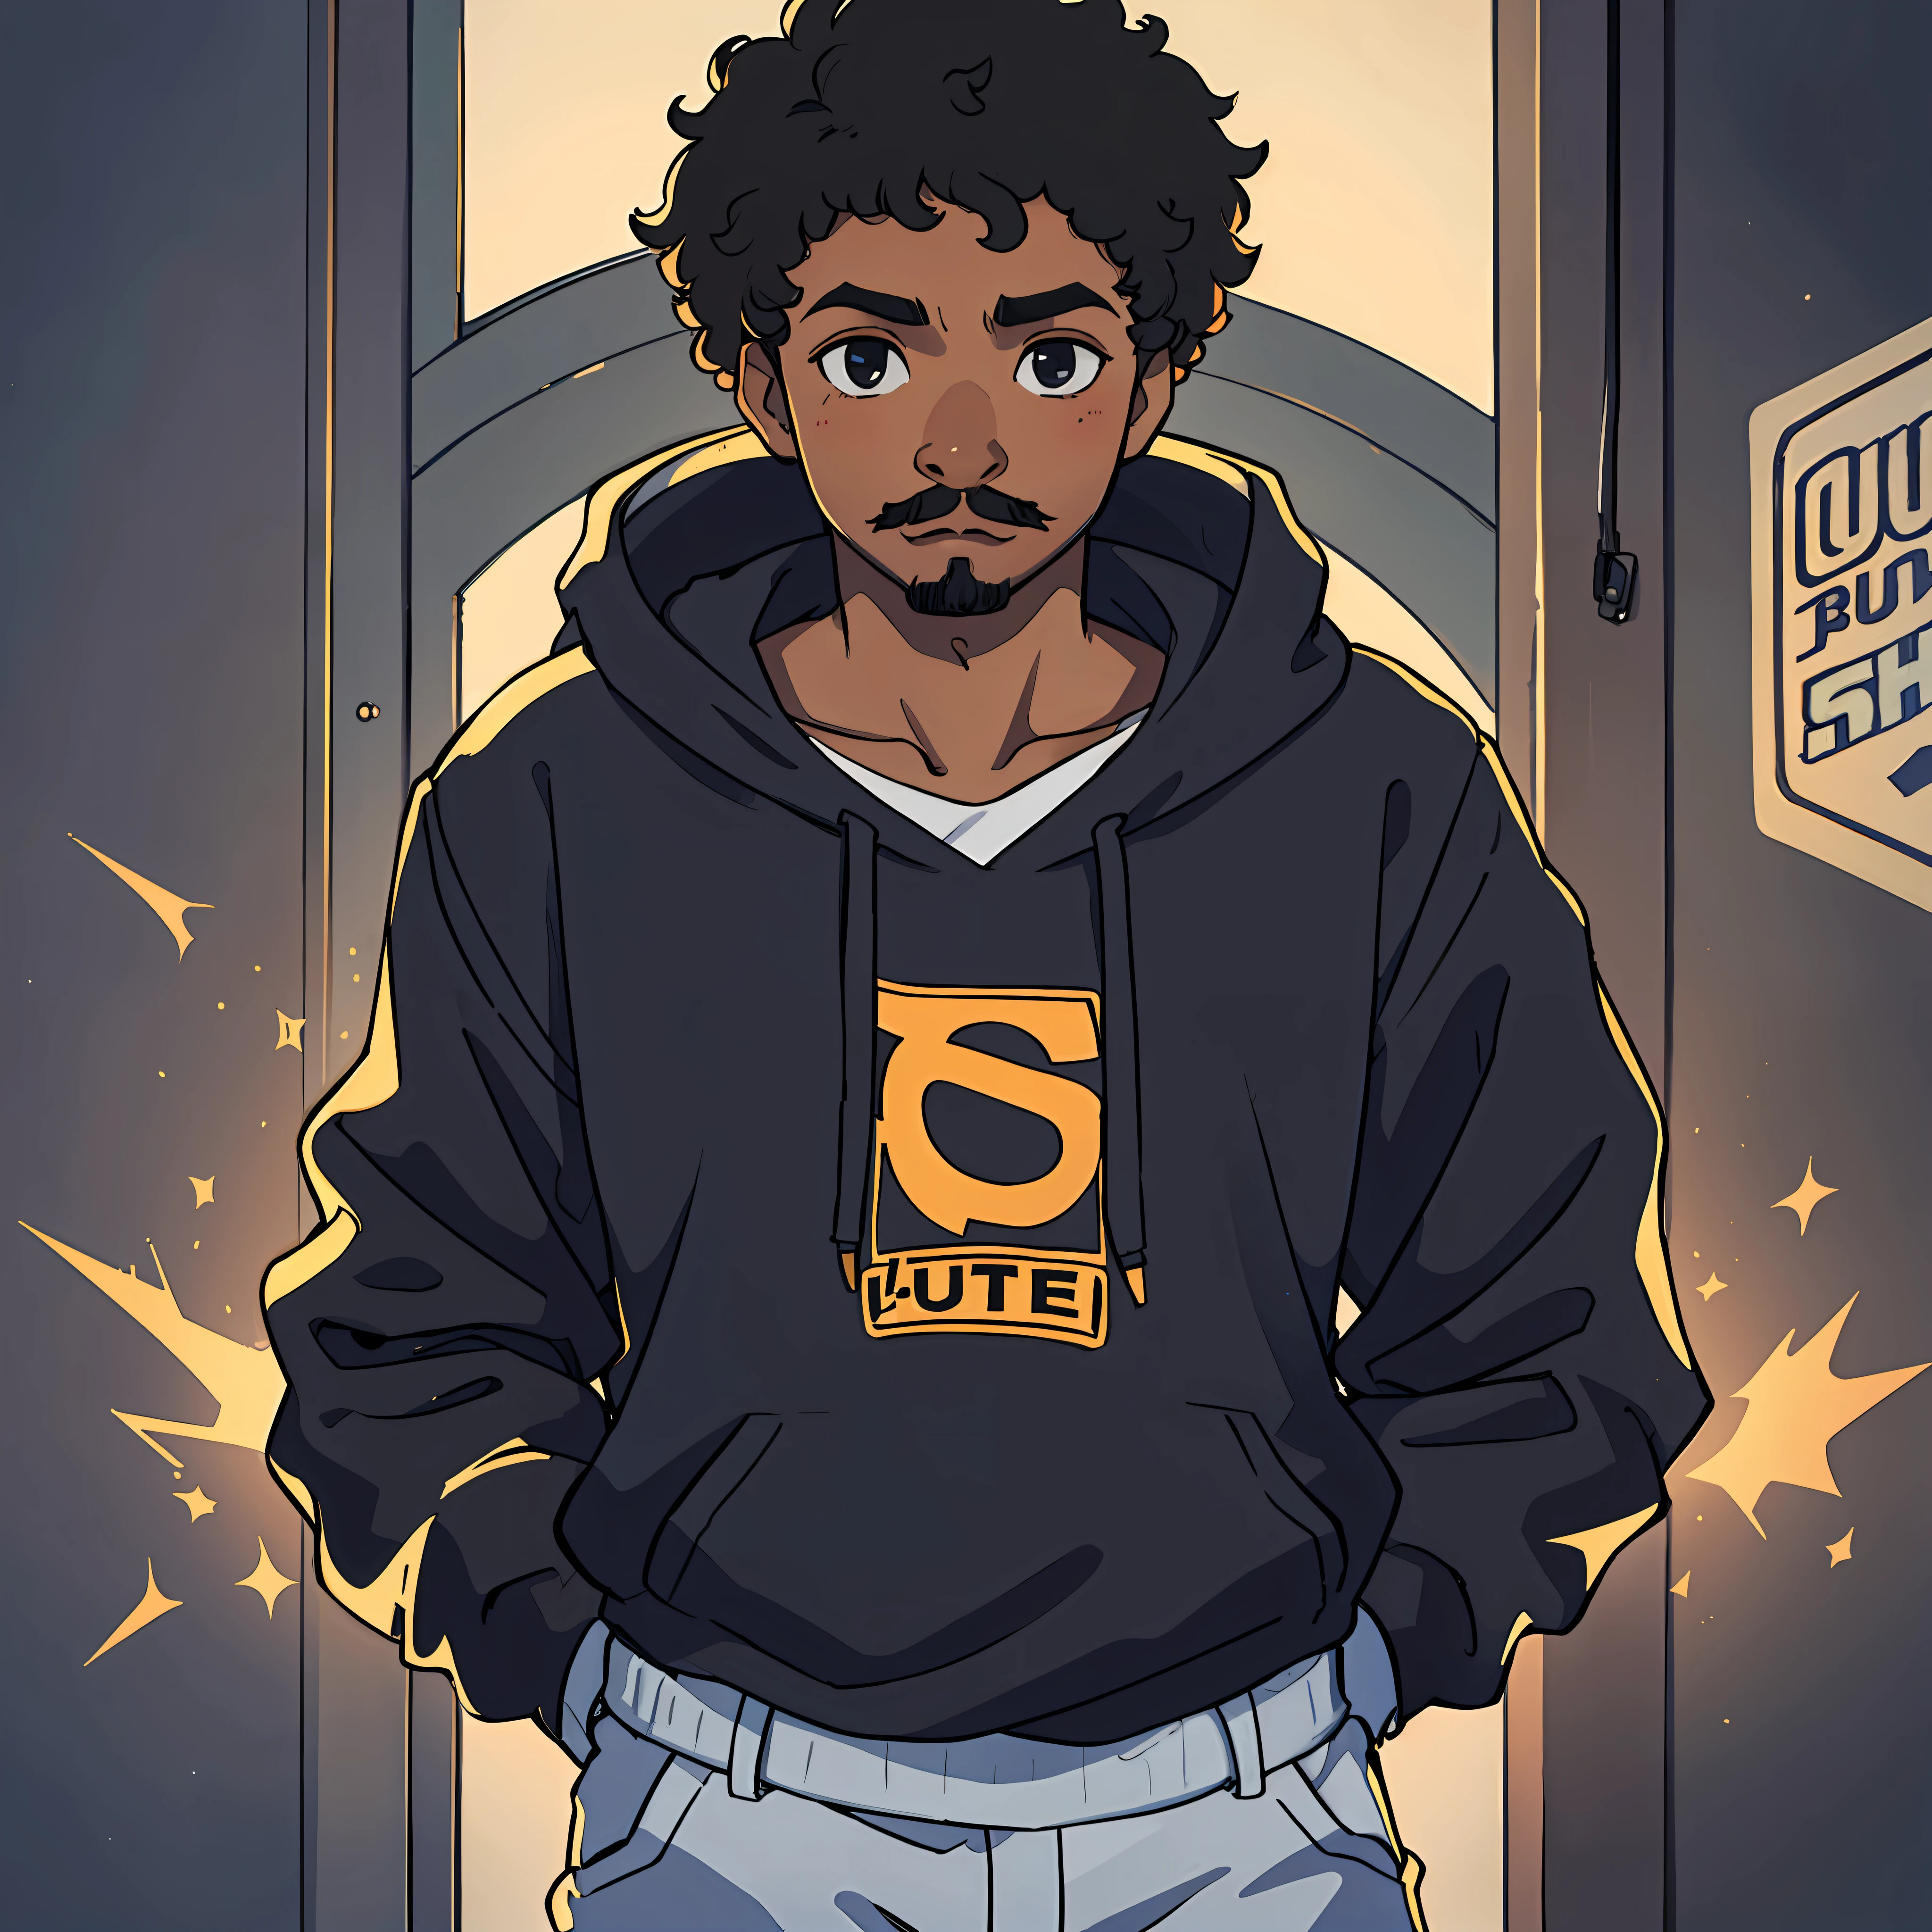 A 20-year-old, black teenager with super short, curly hair, wearing a hoodie, has a goatee and a super thin mustache. SUPER DETAILED